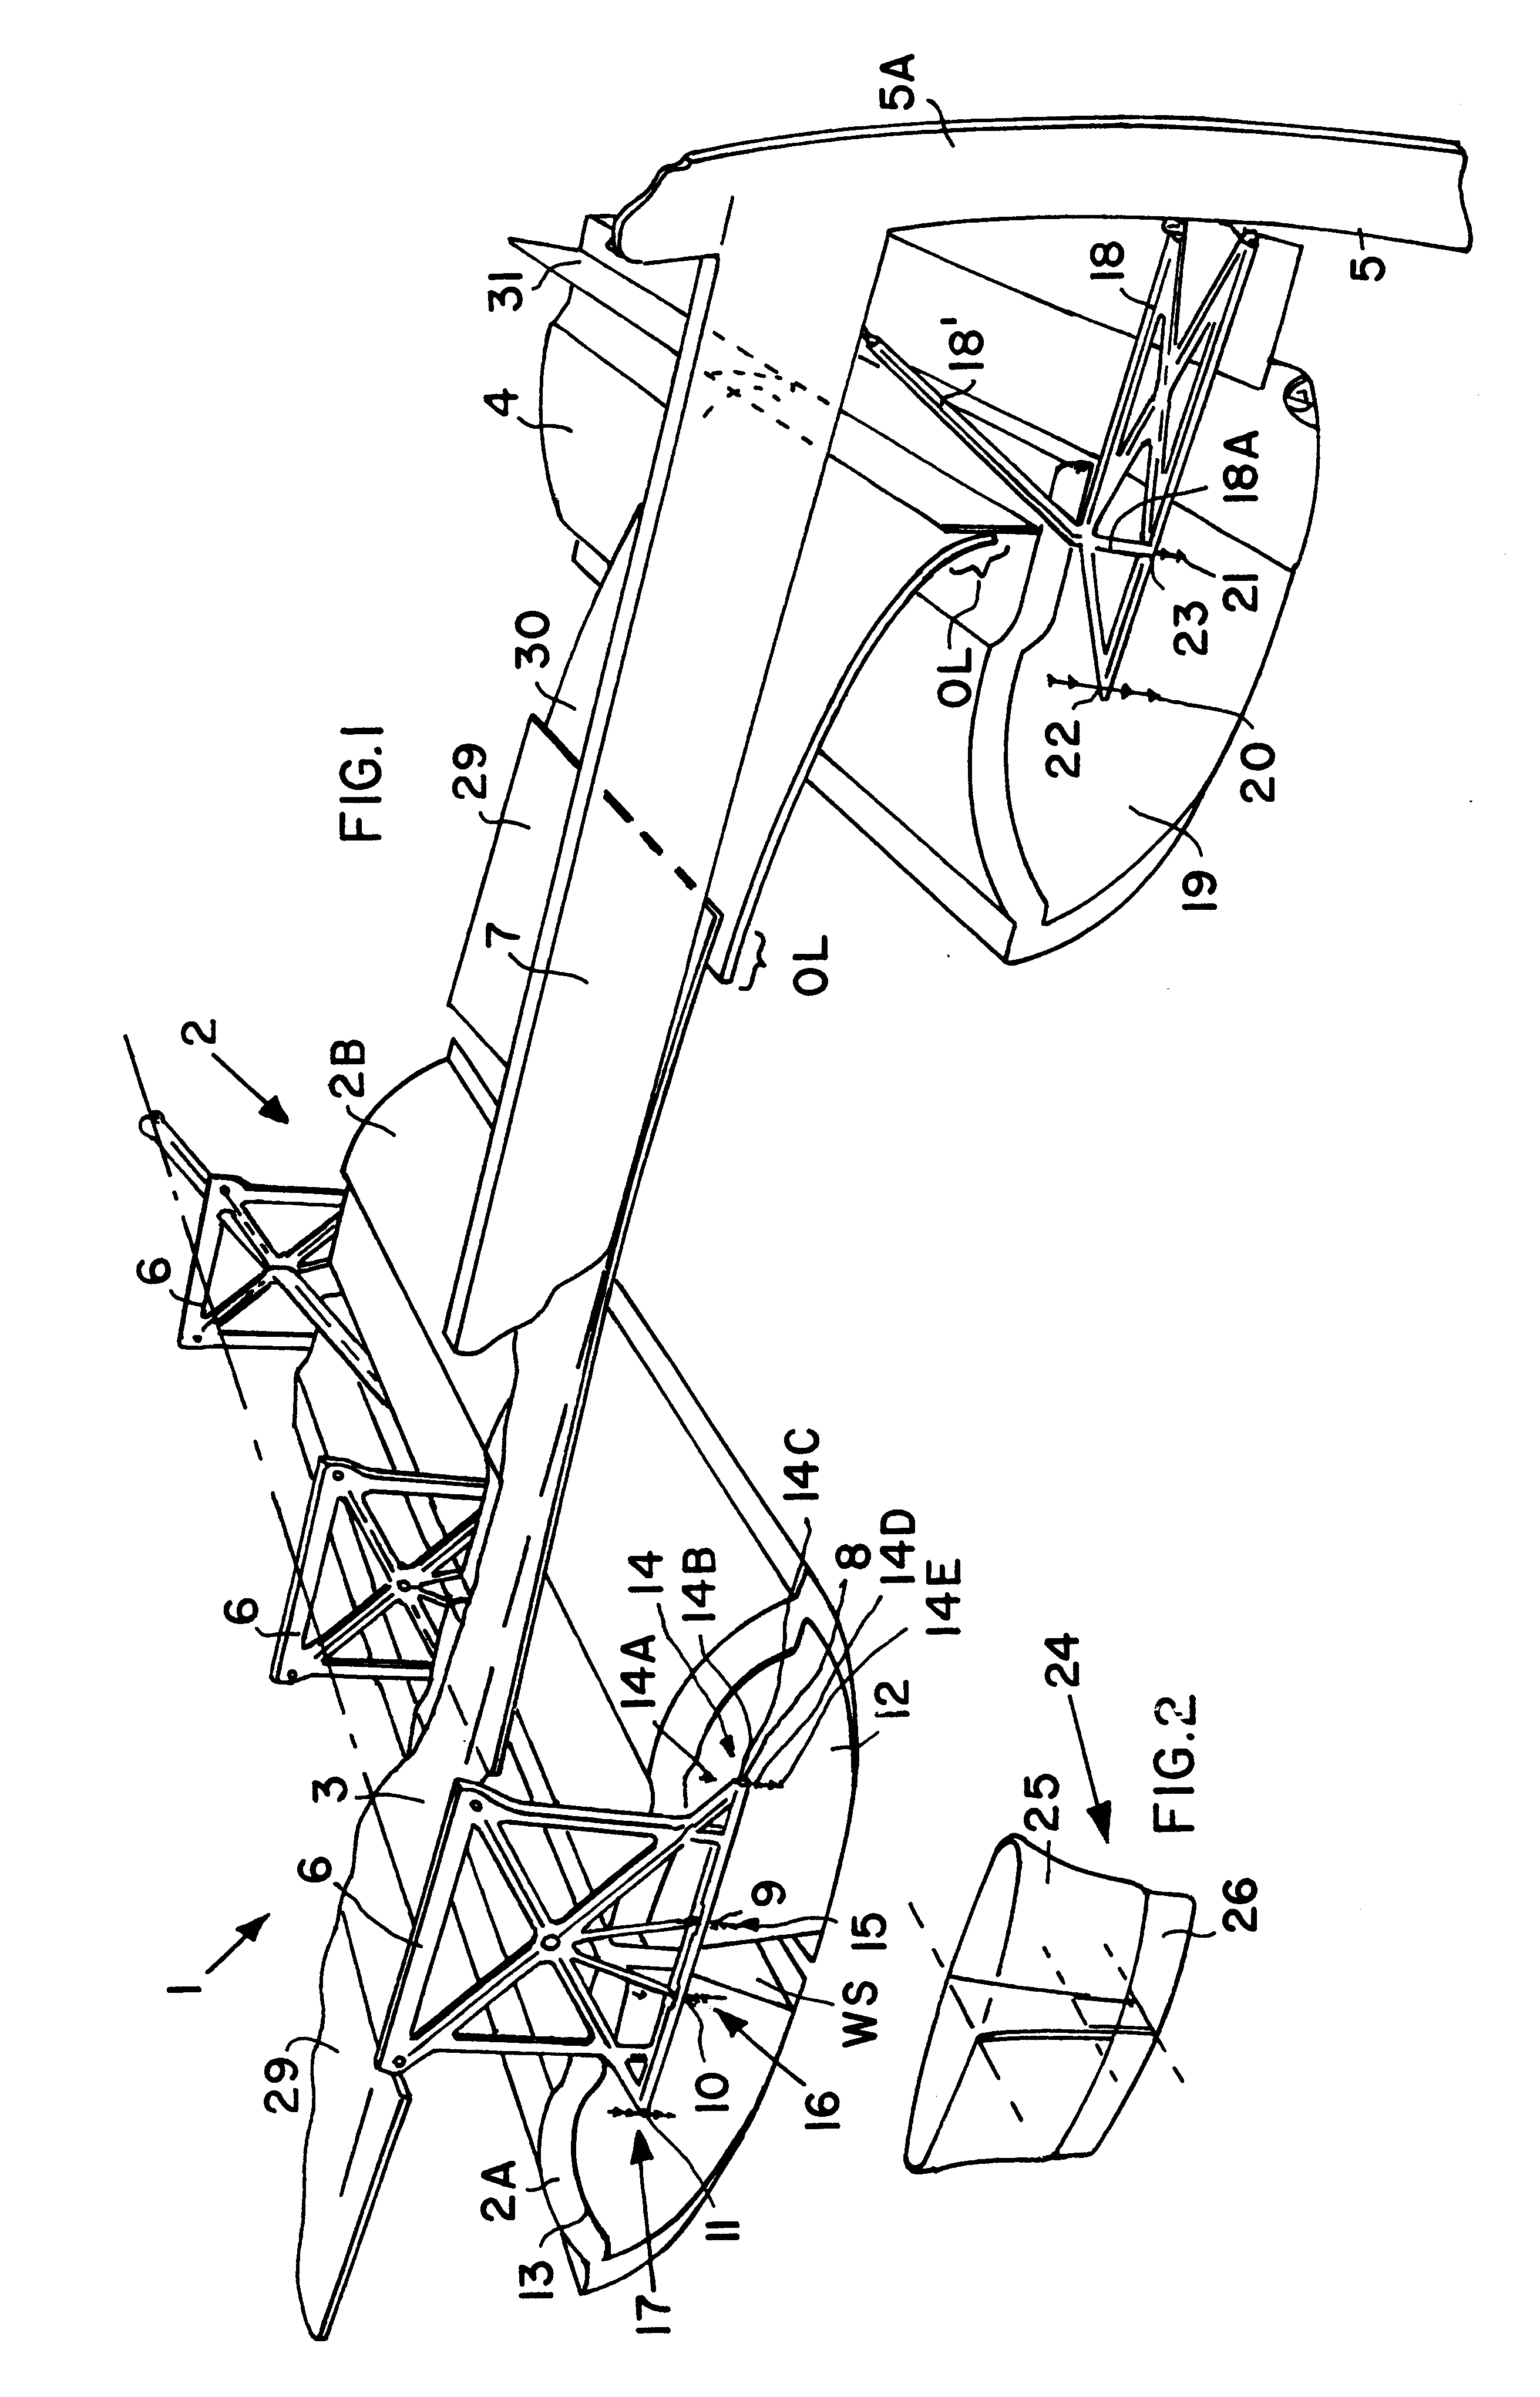 Variable position and modular luggage storage system for an aircraft passenger cabin